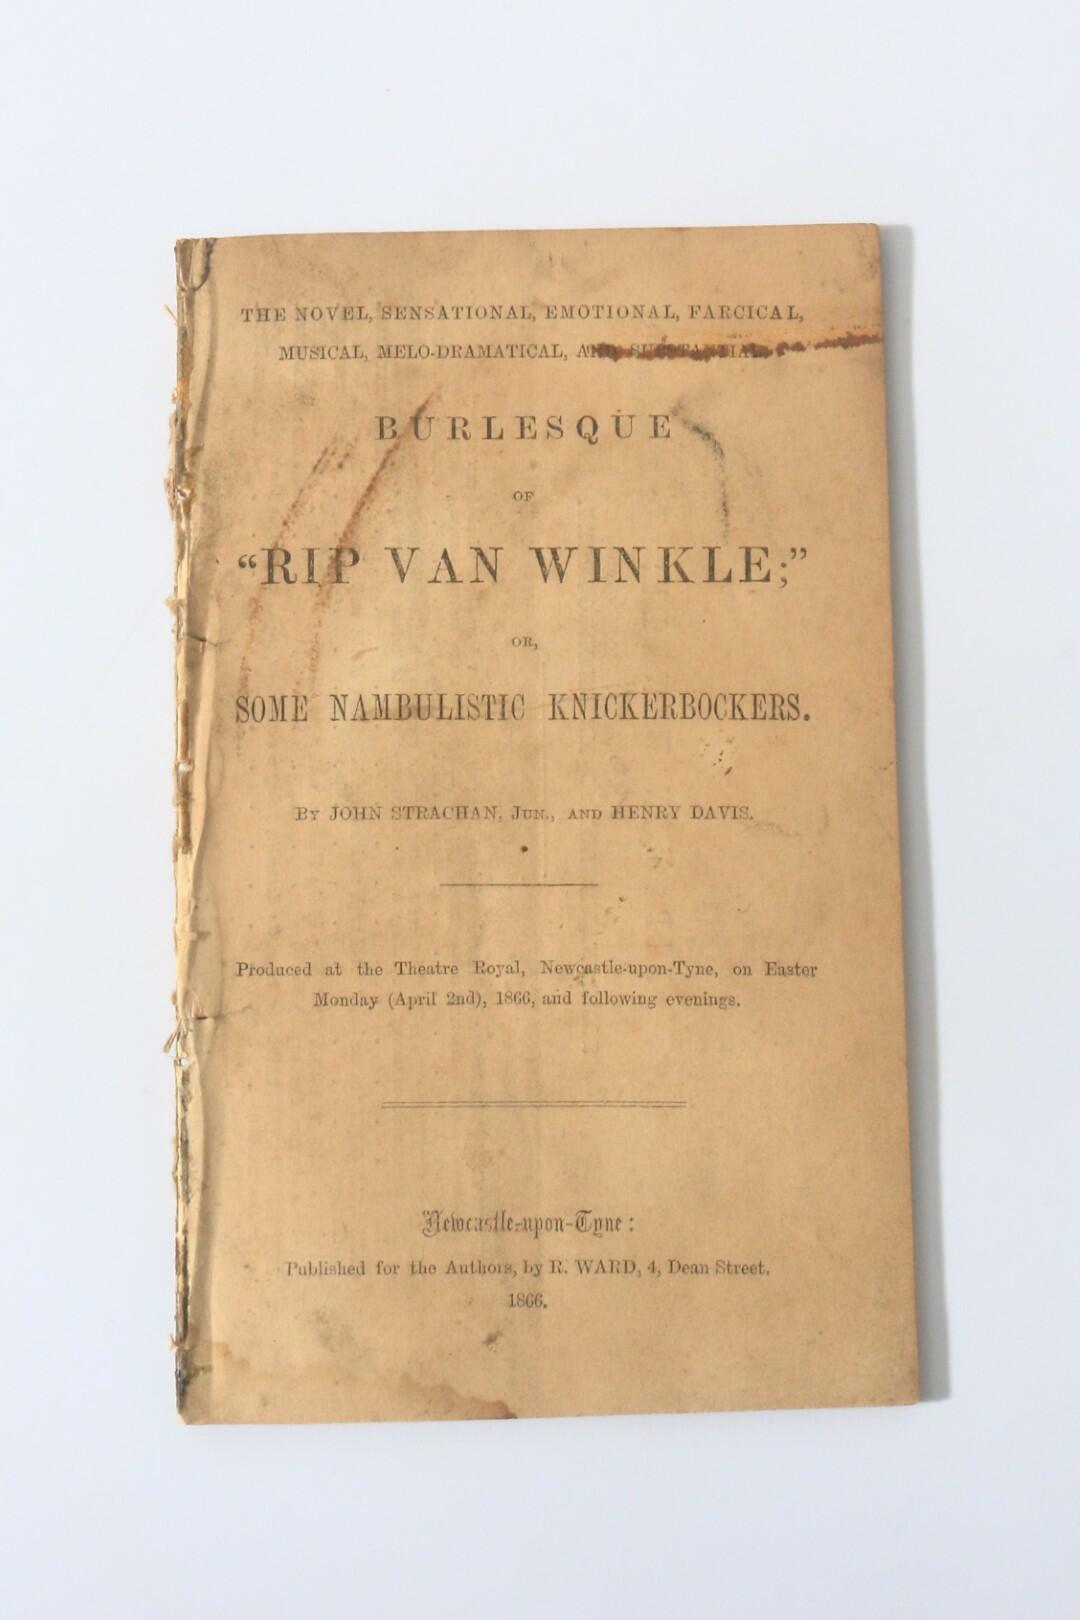 John Strachan & Henry Dave - The Novel, Sensational, Emotional, Farcical, Musical, Melo-Dramatical, and Substantial Burlesque of Rip Van Winkle, or, Some Nambulistic Knickerbocker - Privately Printed, 1866, First Edition.